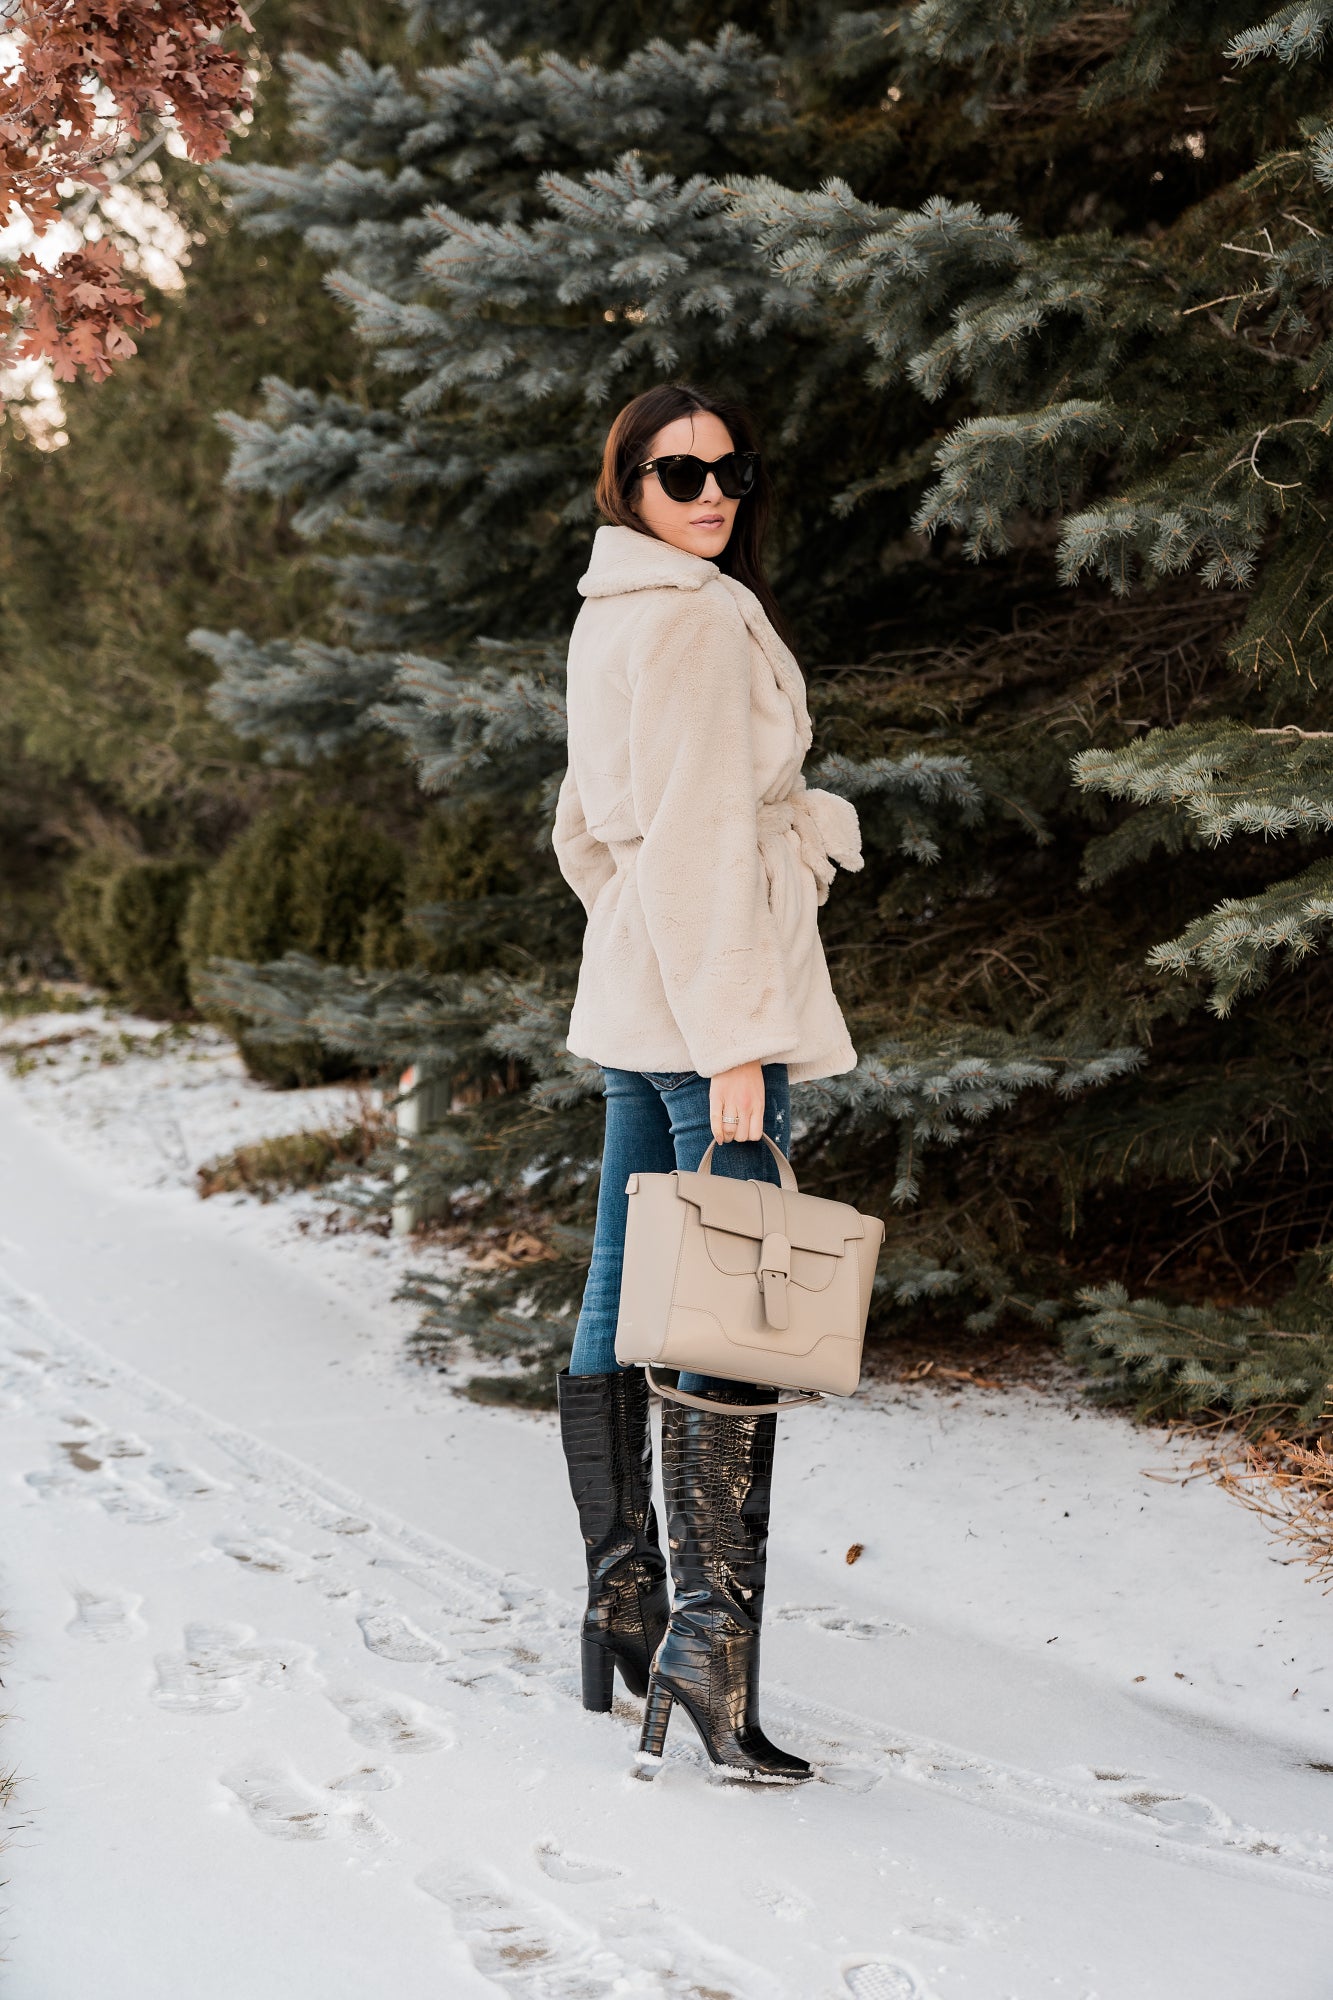 Cozy Coats and Boots... – Rachel Parcell, Inc.